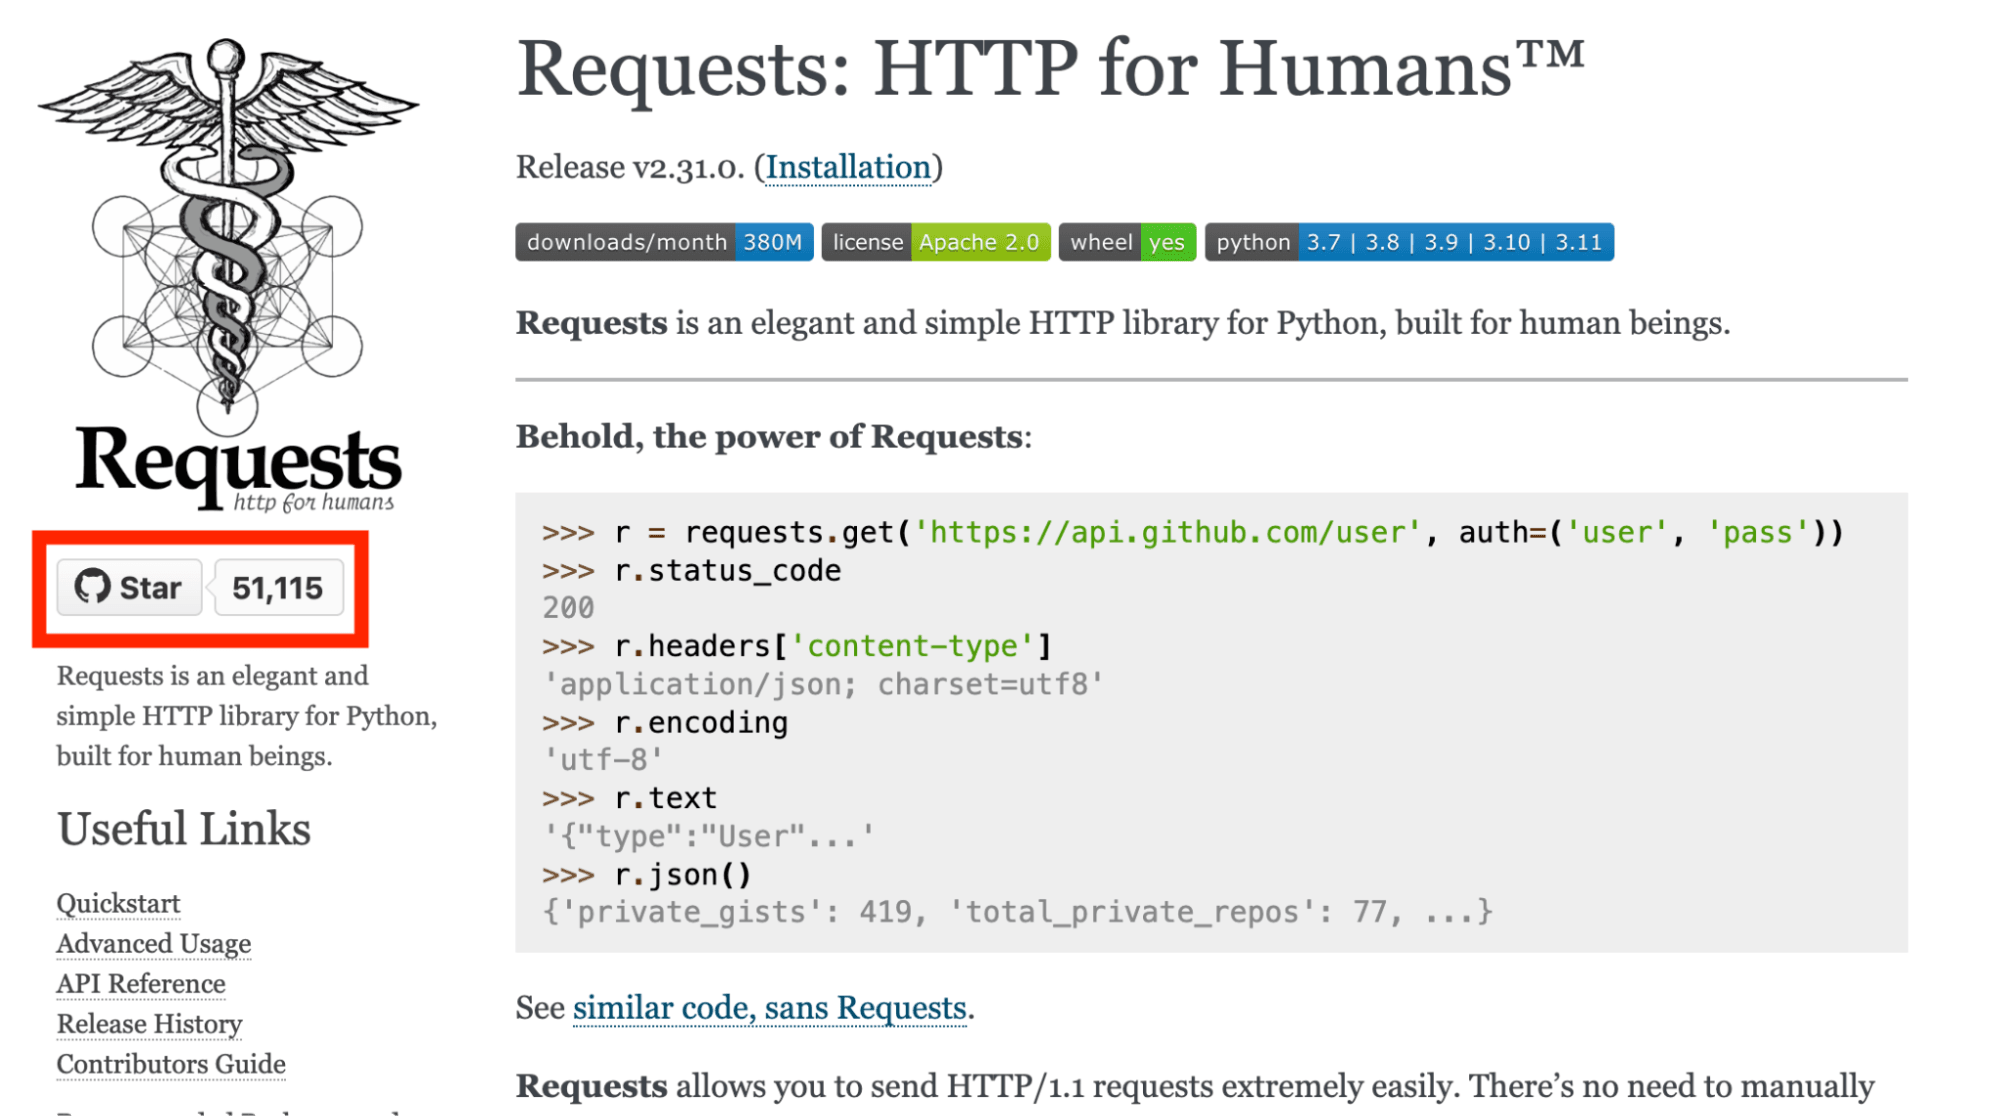 requests python library home page - image17.png